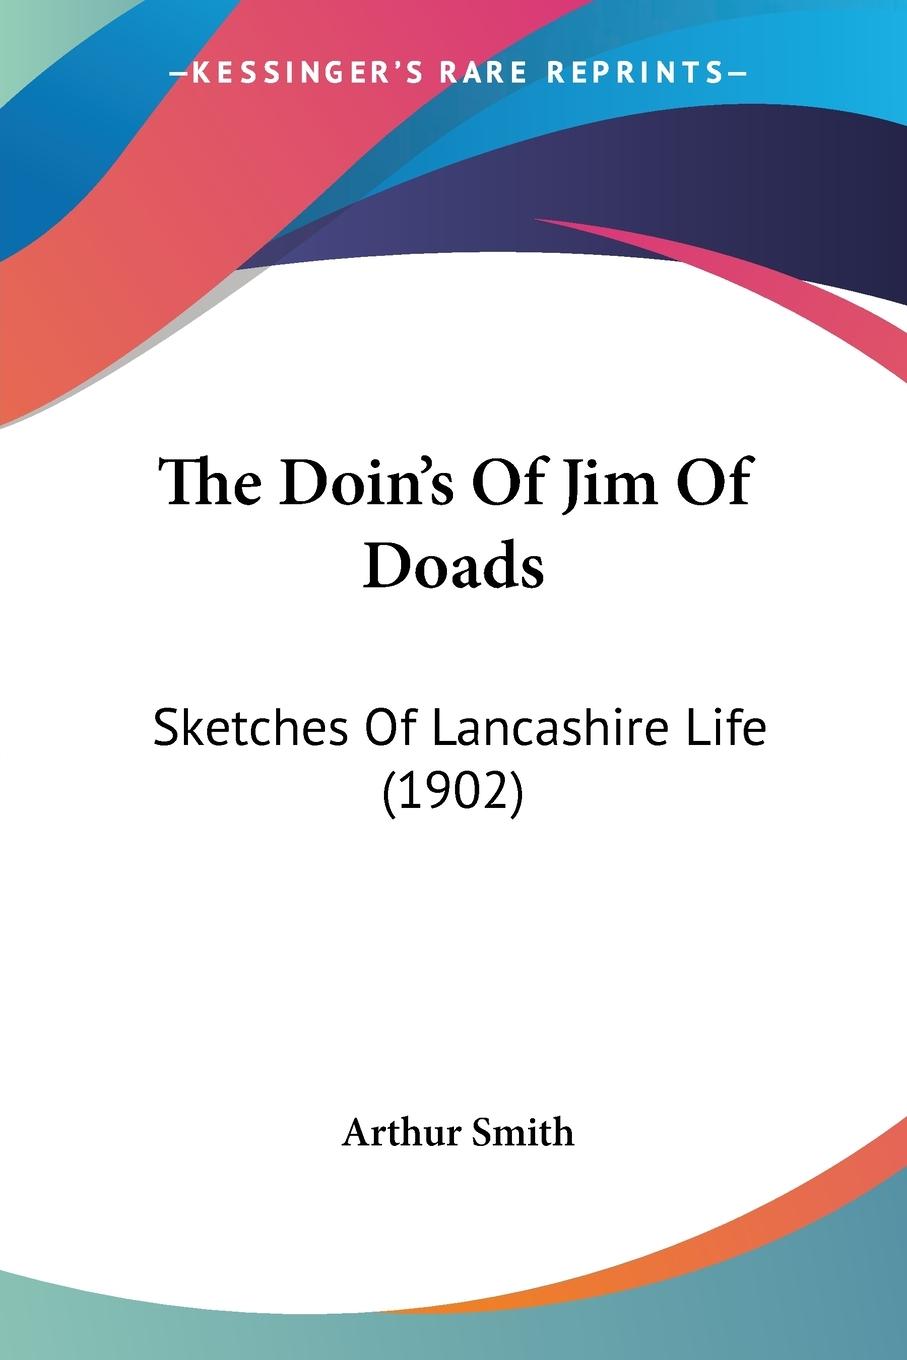 The Doinâ??s Of Jim Of Doads: Sketches Of Lancashire Life (1902)